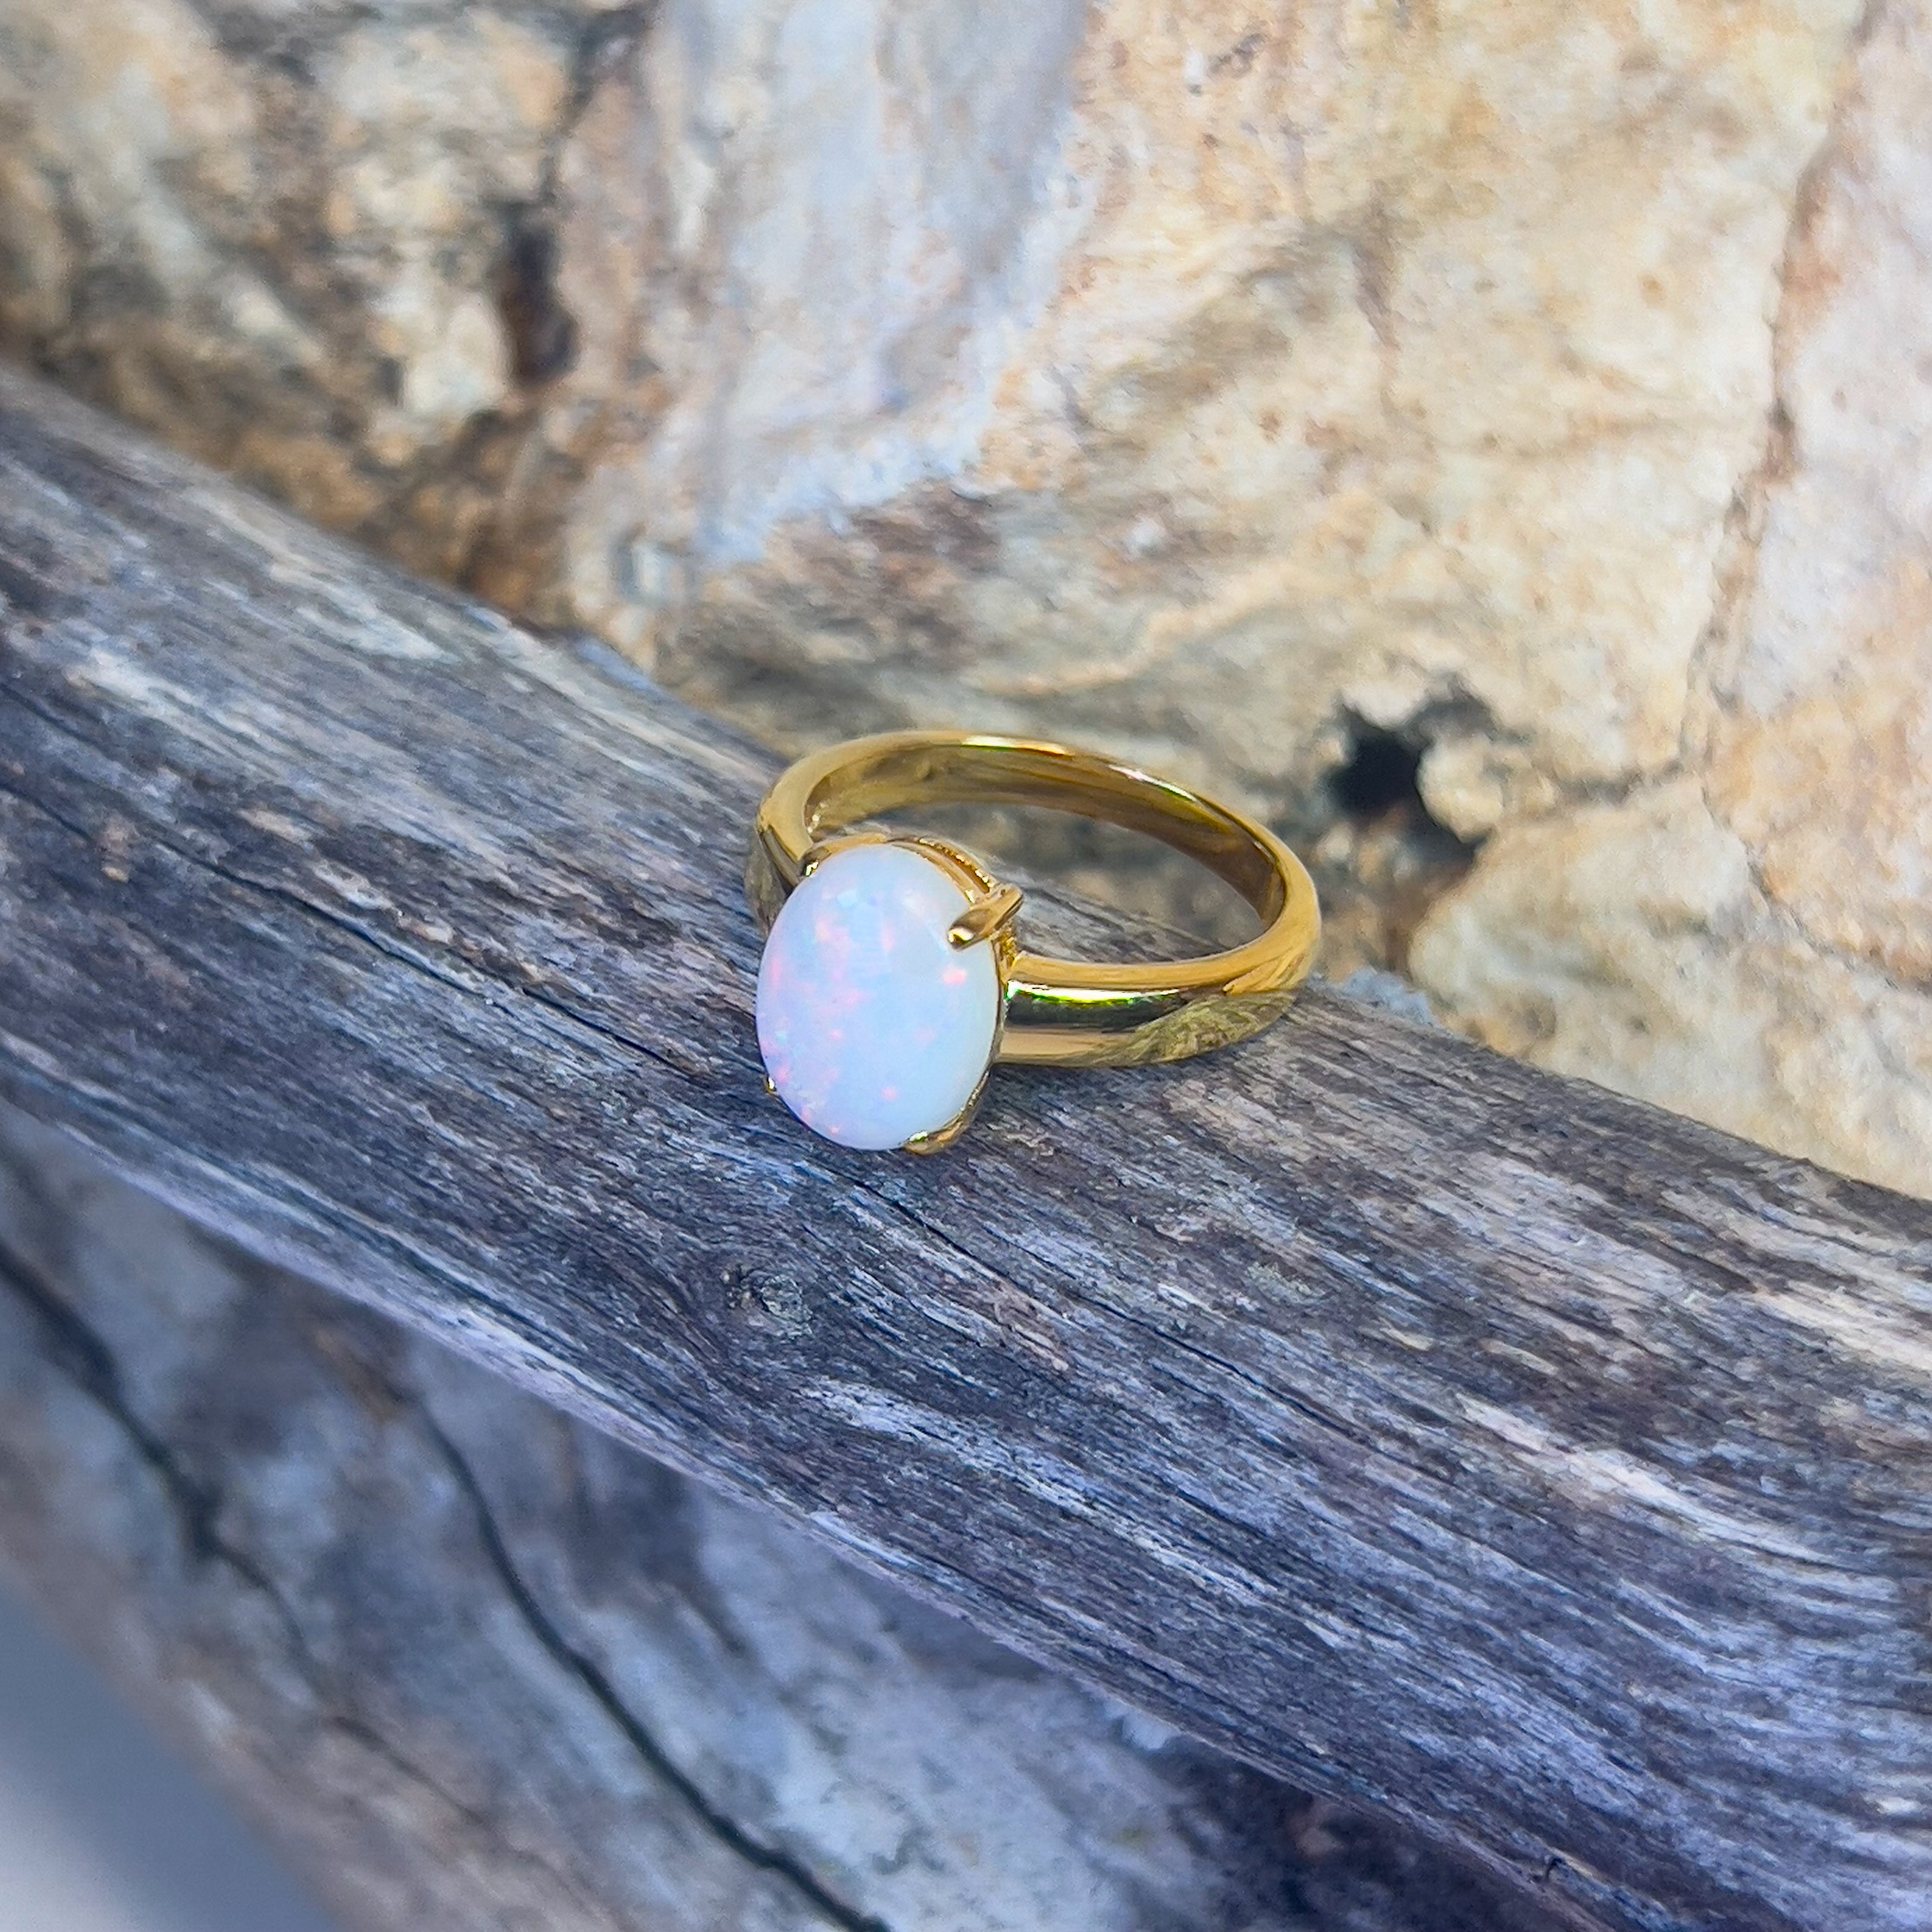 Gold Plated Sterling Silver solitaire ring White Opal 1.8ct - Masterpiece Jewellery Opal & Gems Sydney Australia | Online Shop